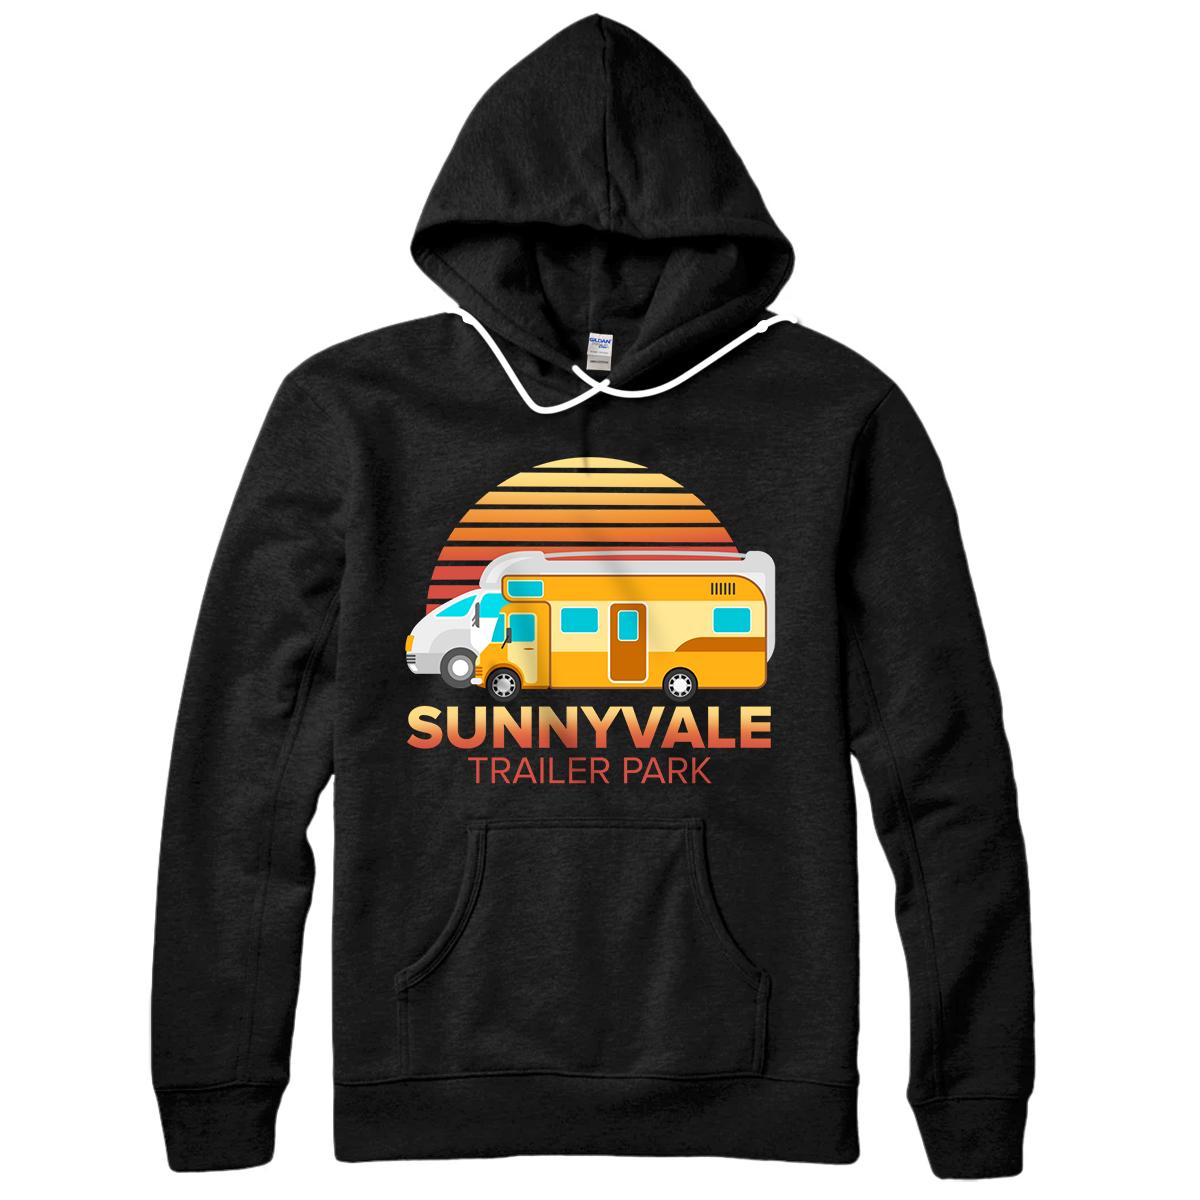 Personalized Funny design Trailer Park Sunnyvale Lovers design Pullover Hoodie